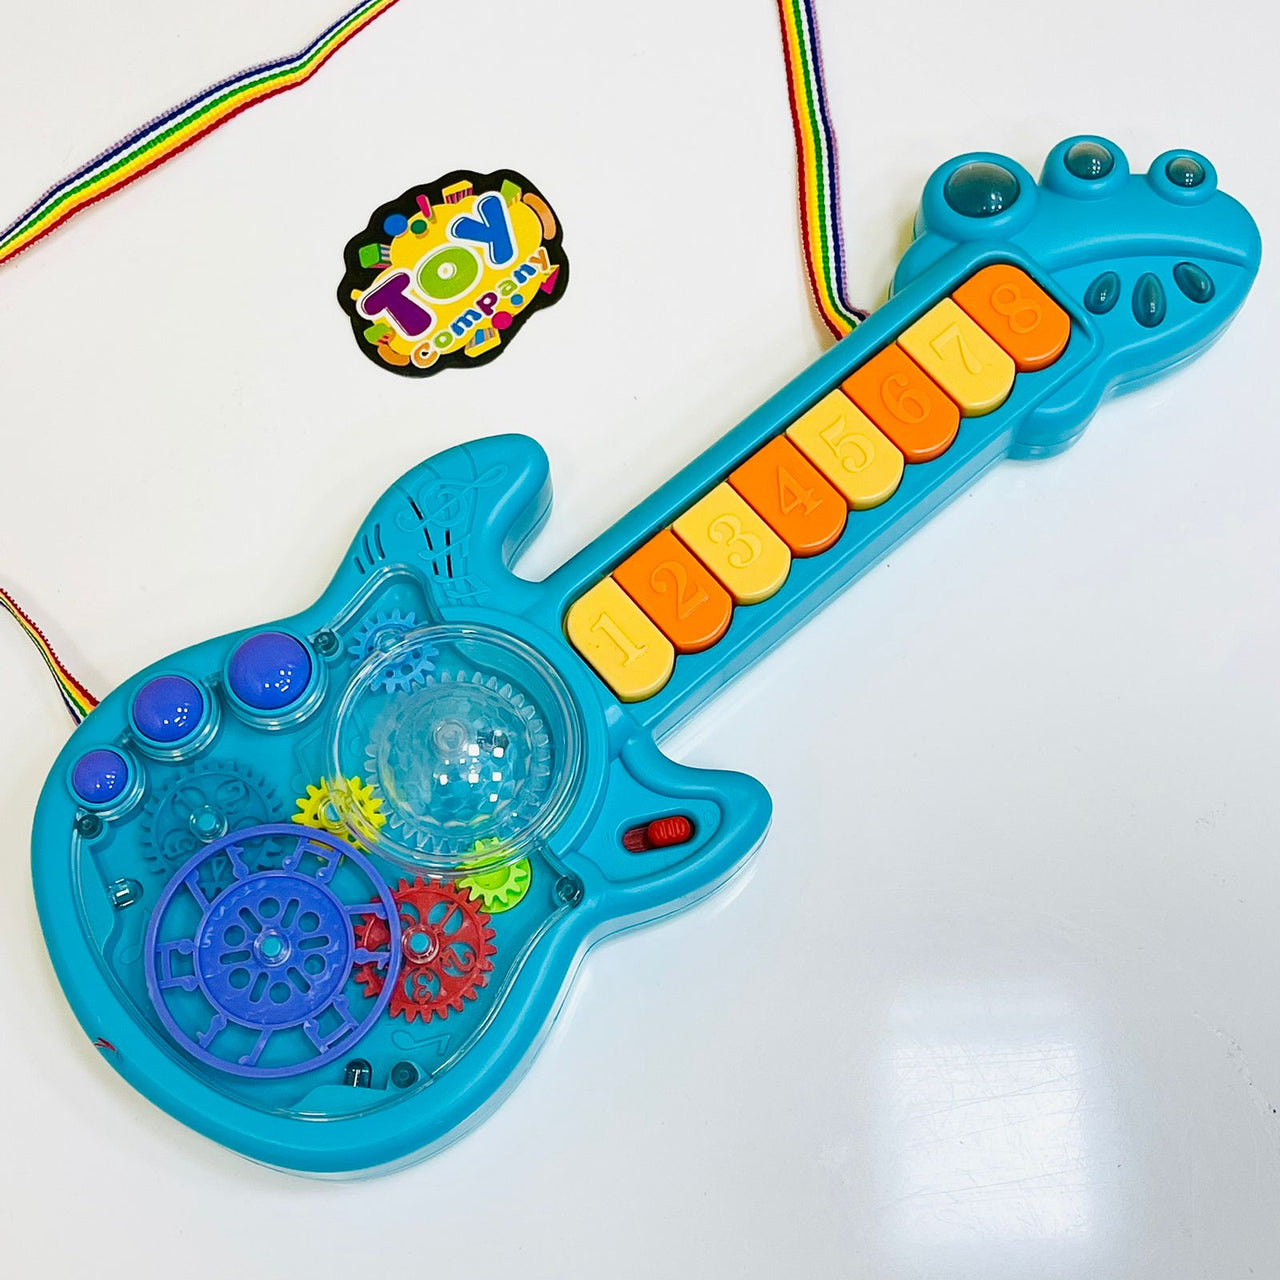 Musical Gear Guitar with Lights & Sound